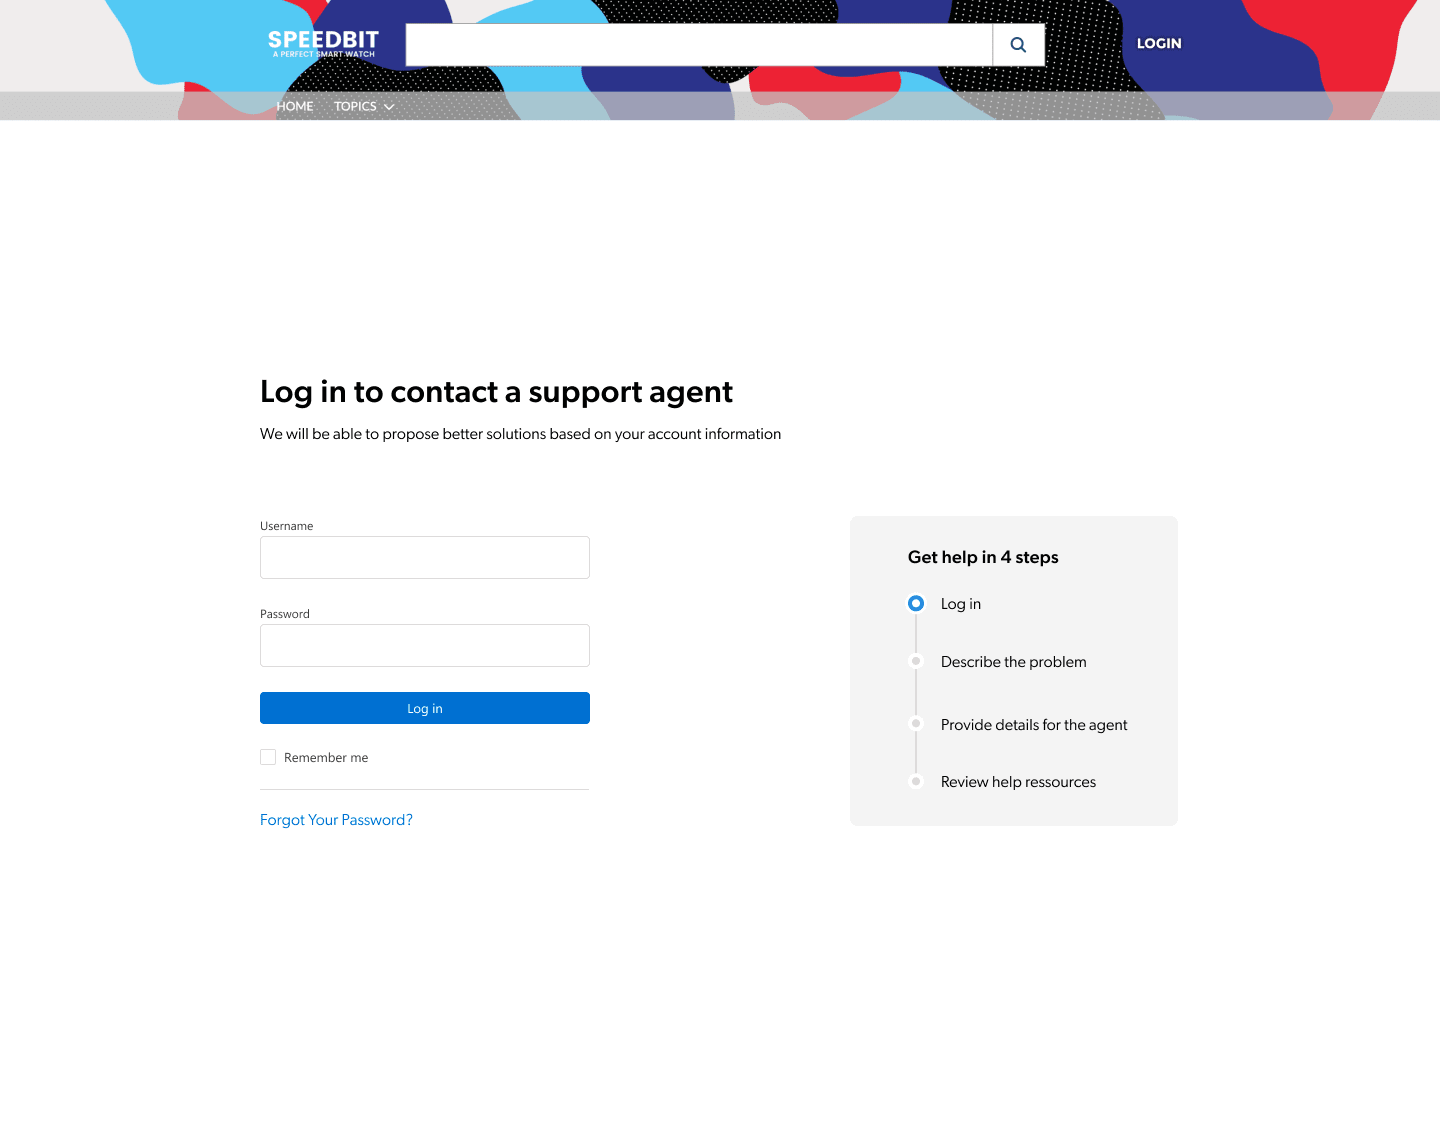 Example of a login page in a support ticket system